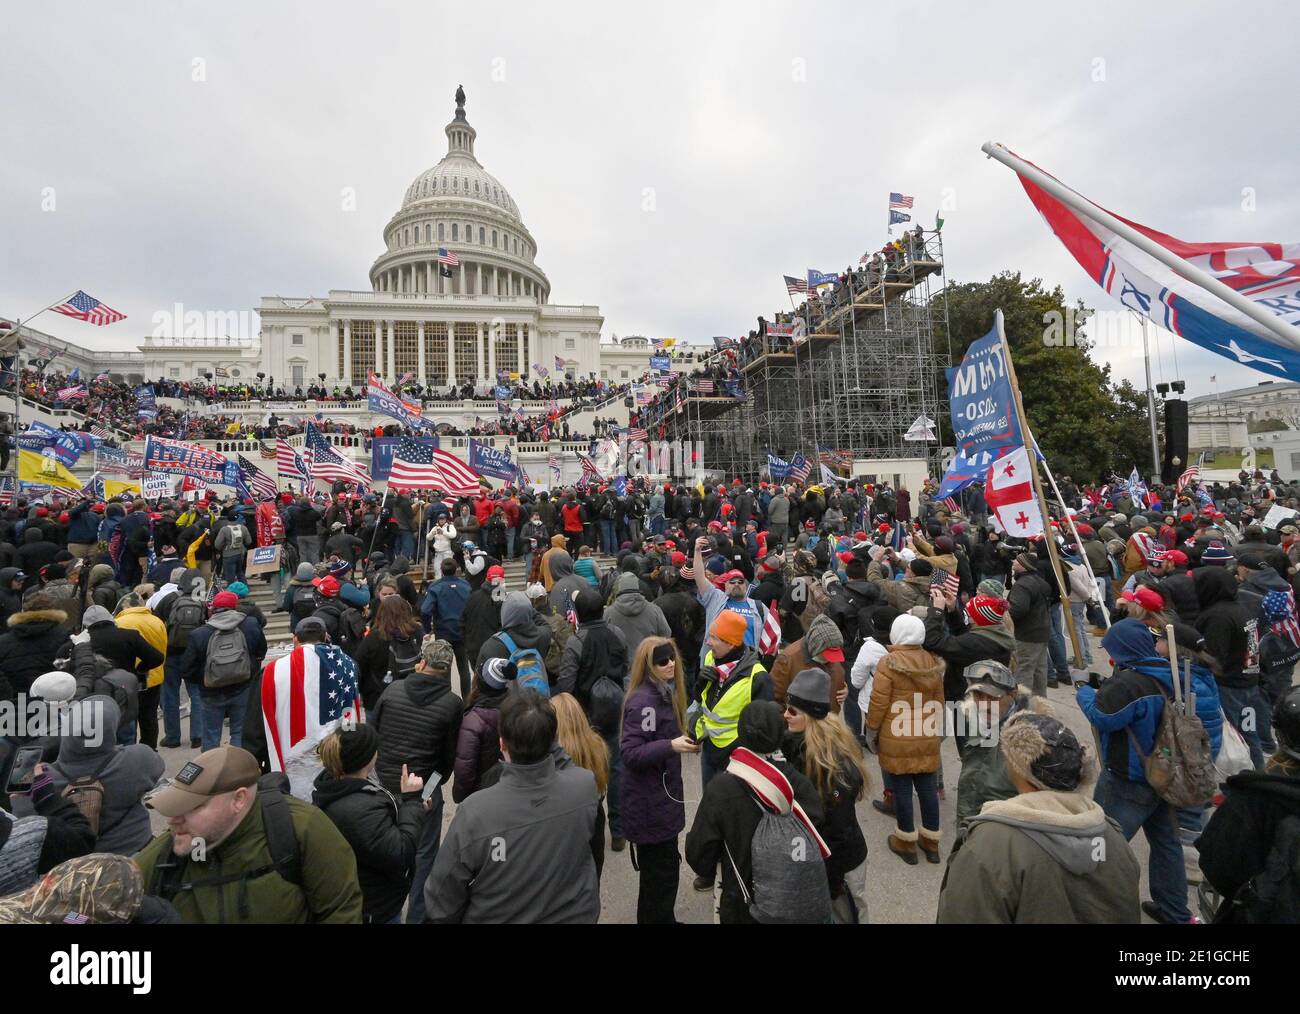 Washington, District of Columbia, USA. 6th Jan, 2021. Thousands of pro-Trump supporters rallied on January 6, 2021 in the District of Columbia (DC) outside the US State Capitol as the US Senate certificated the Electoral College vote ratifying Biden as the president of the US. Credit: Essdras M. Suarez/ZUMA Wire/Alamy Live News Stock Photo